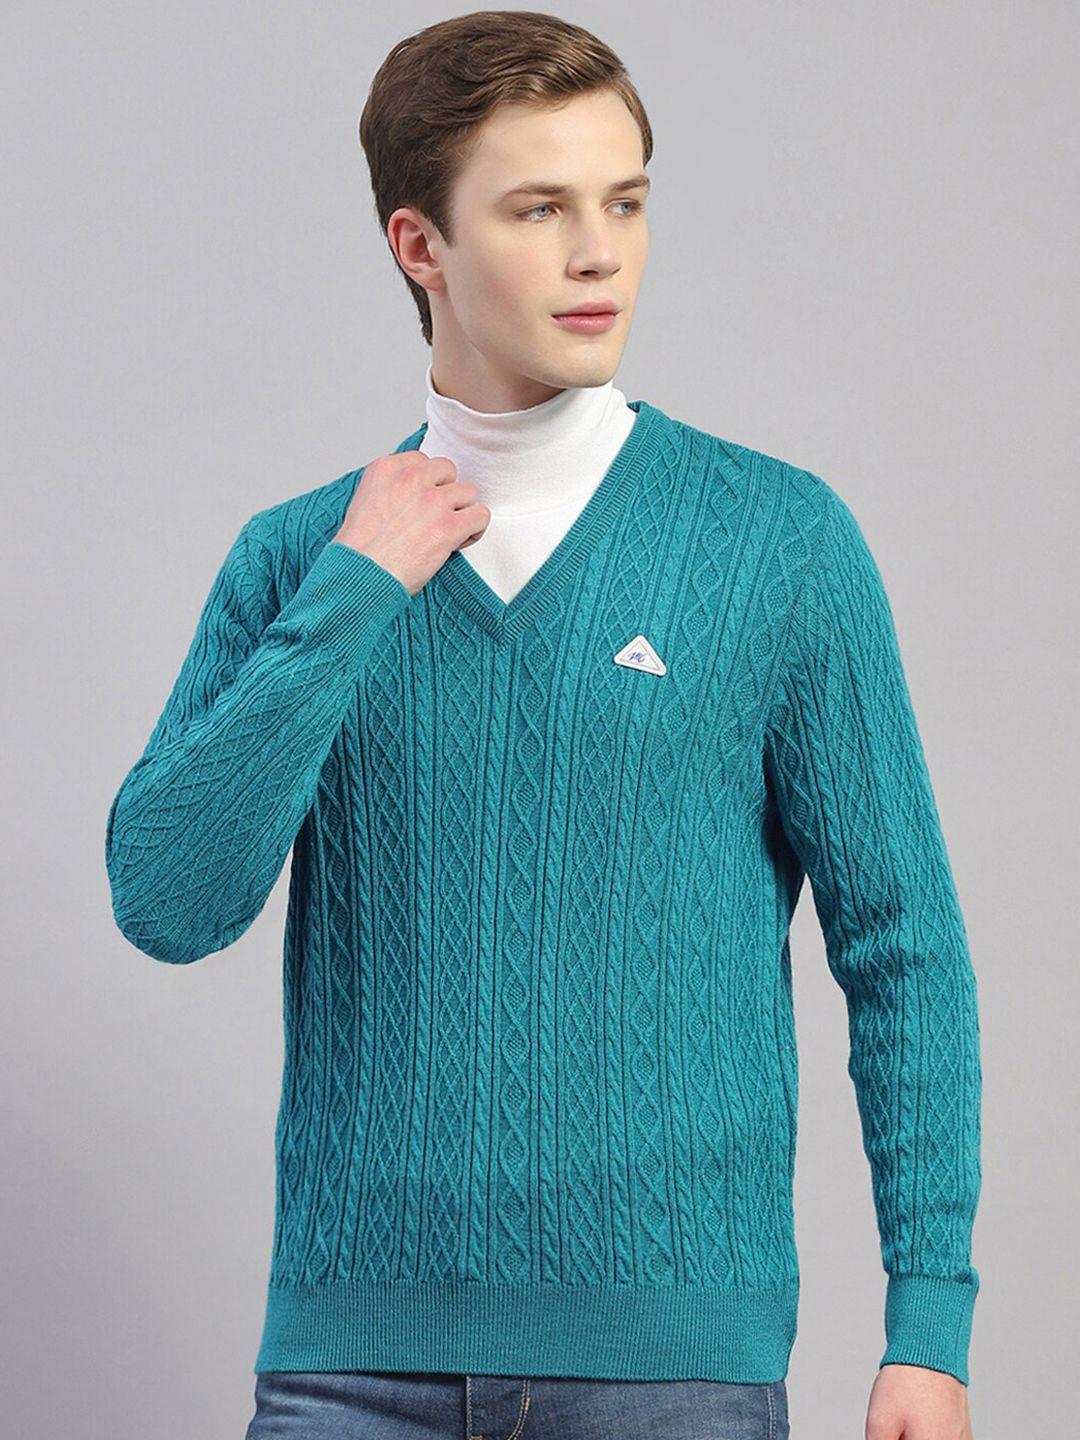 monte-carlo-cable-knit-self-design-woollen-pullover-sweater